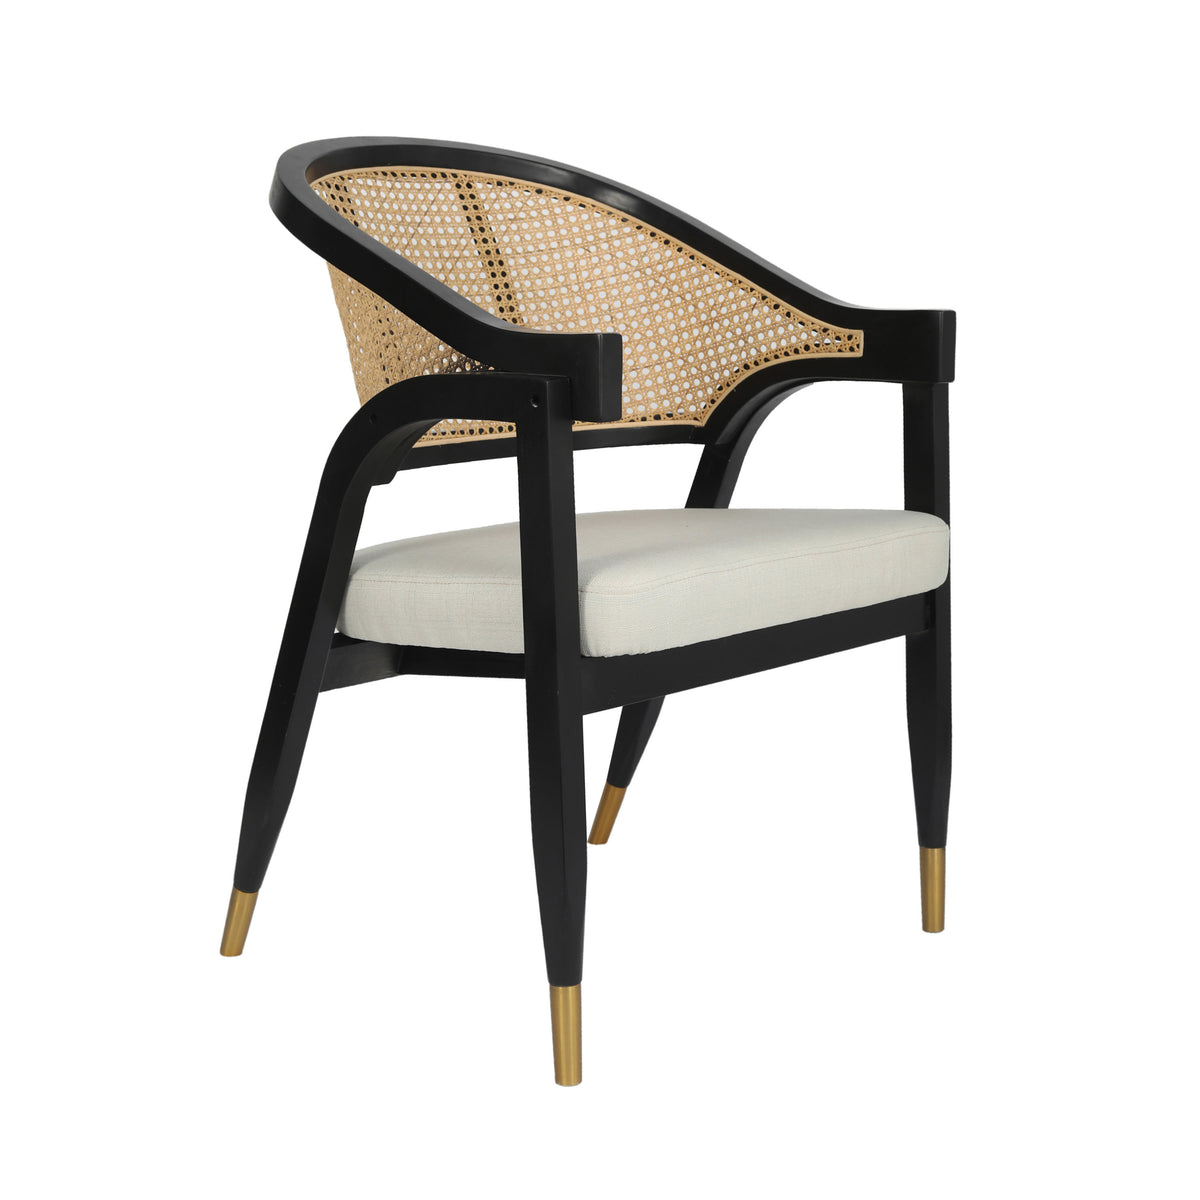 Black |#| Commercial Grade Cane Rattan Dining Chair with Padded Seat - Natural/Black